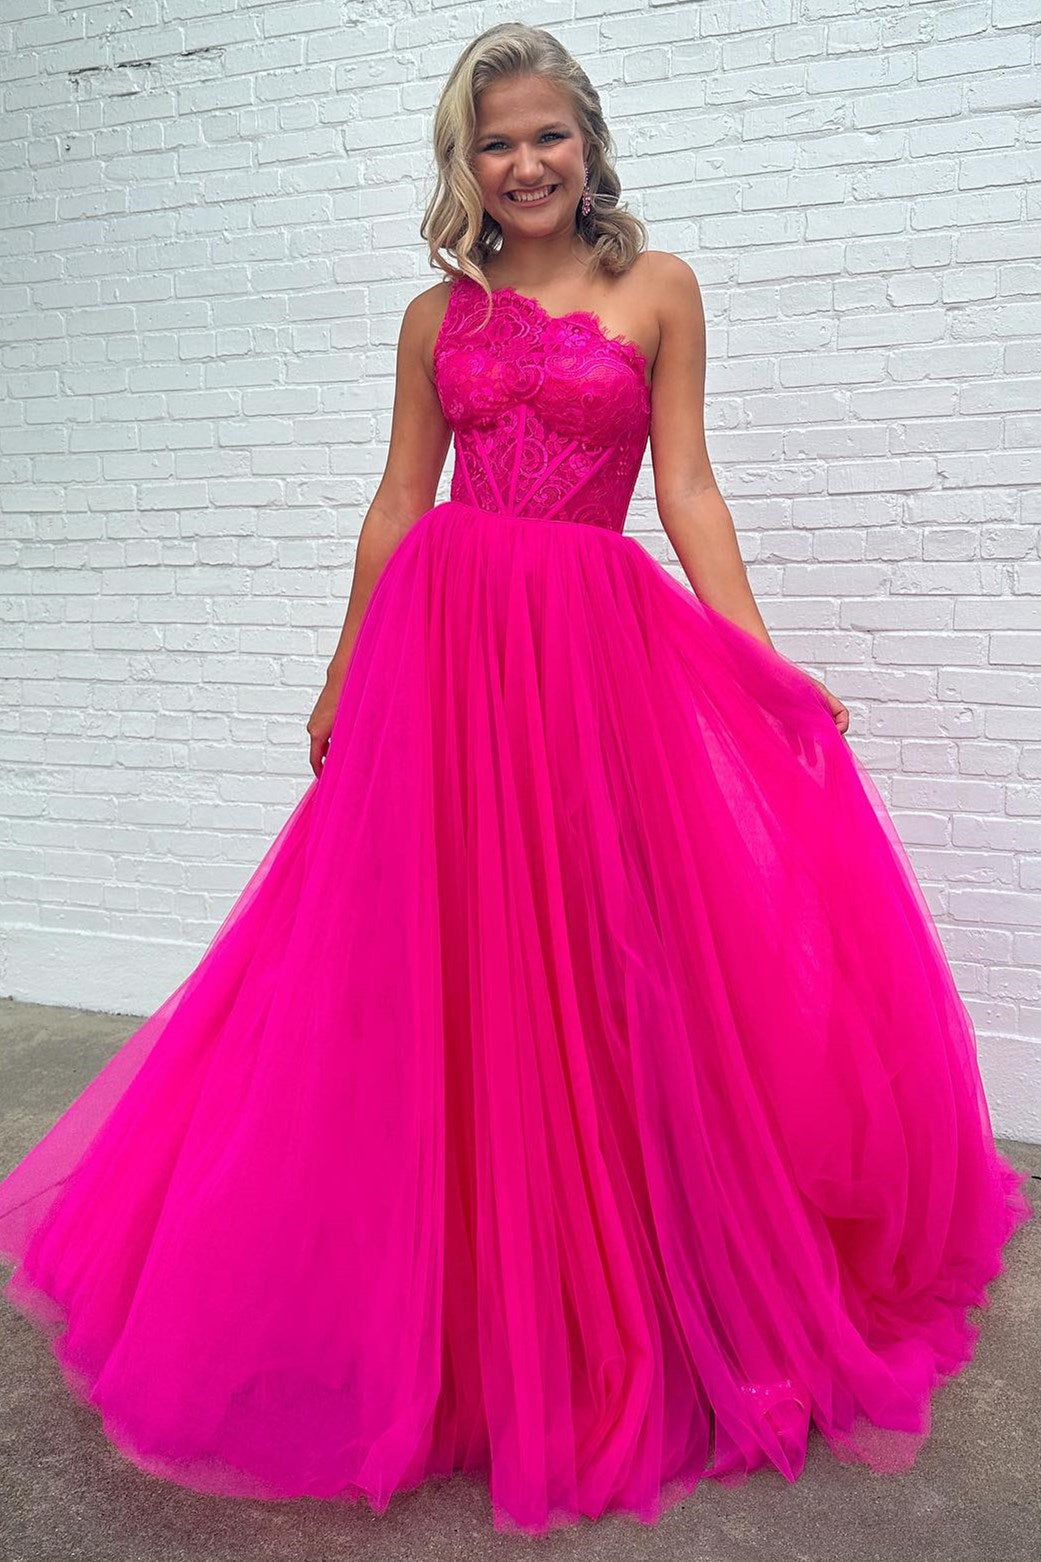 Madilyn |A-line One Shoulder Lace Tulle Prom Dress with Slit